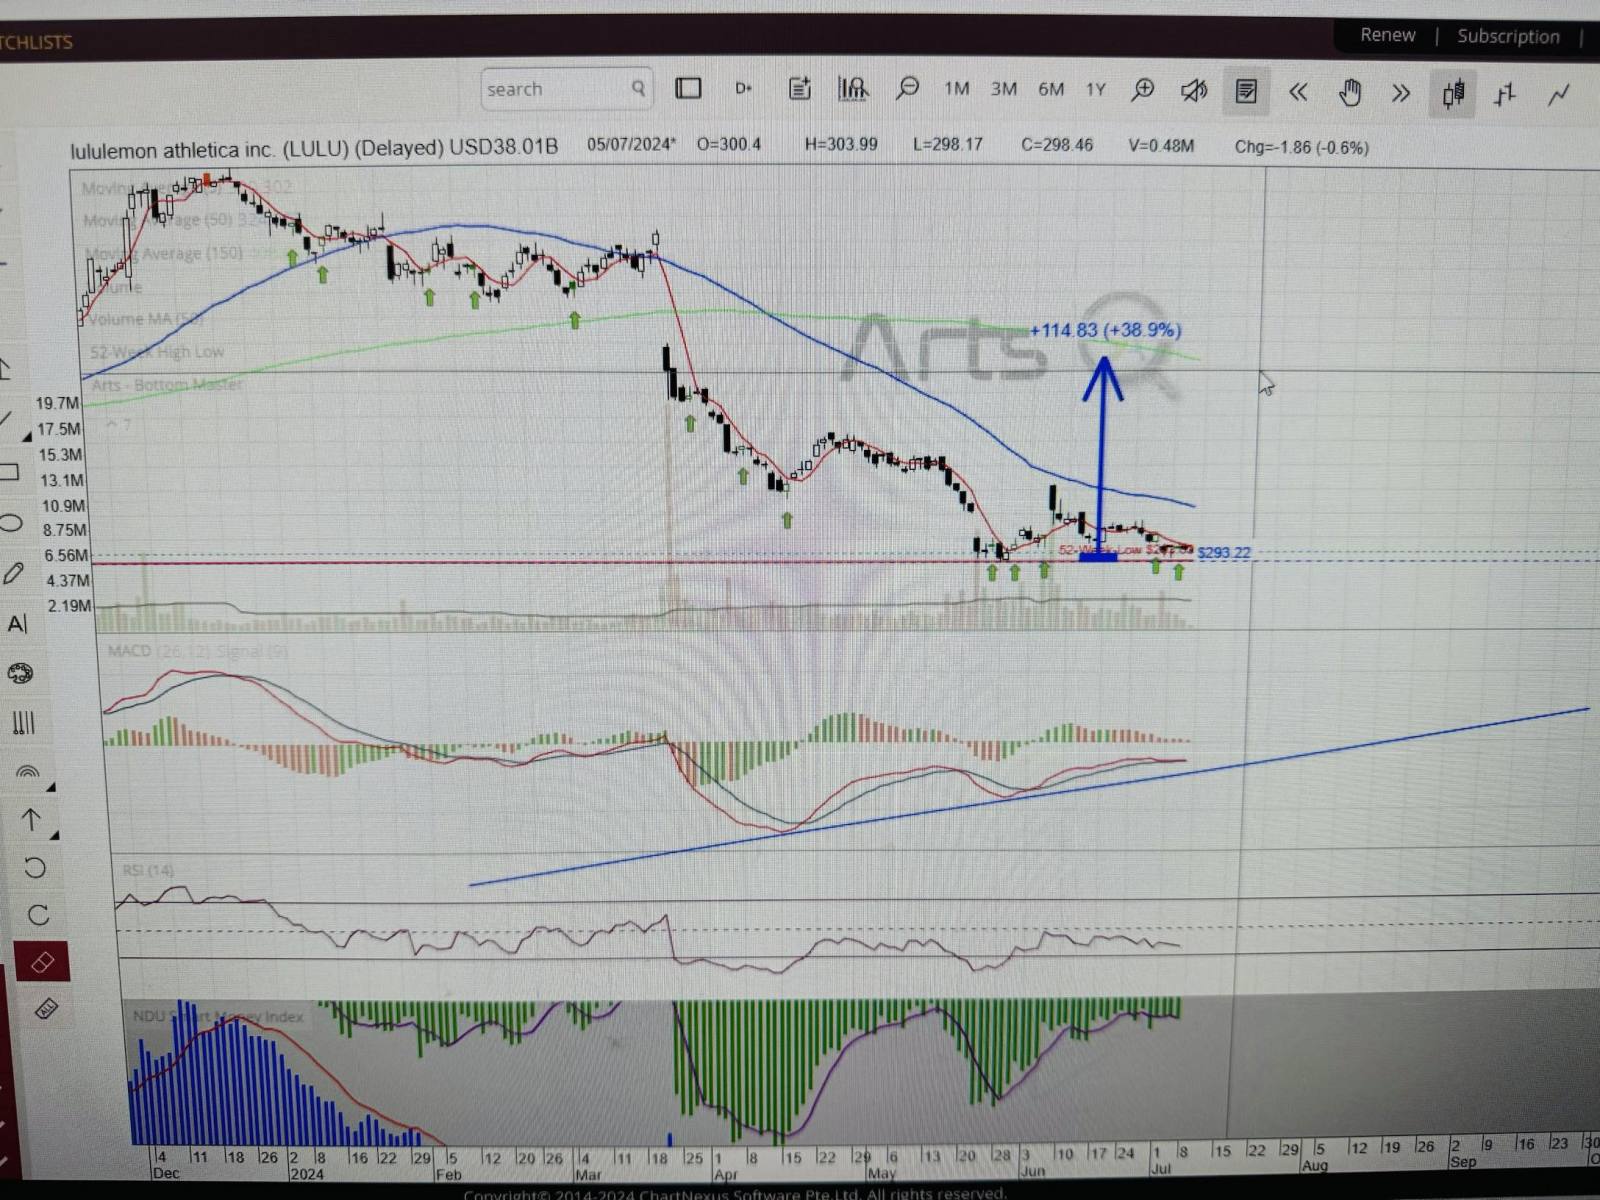 There seems to be a divergence in the MACD for this stock! It should be at the bottom!